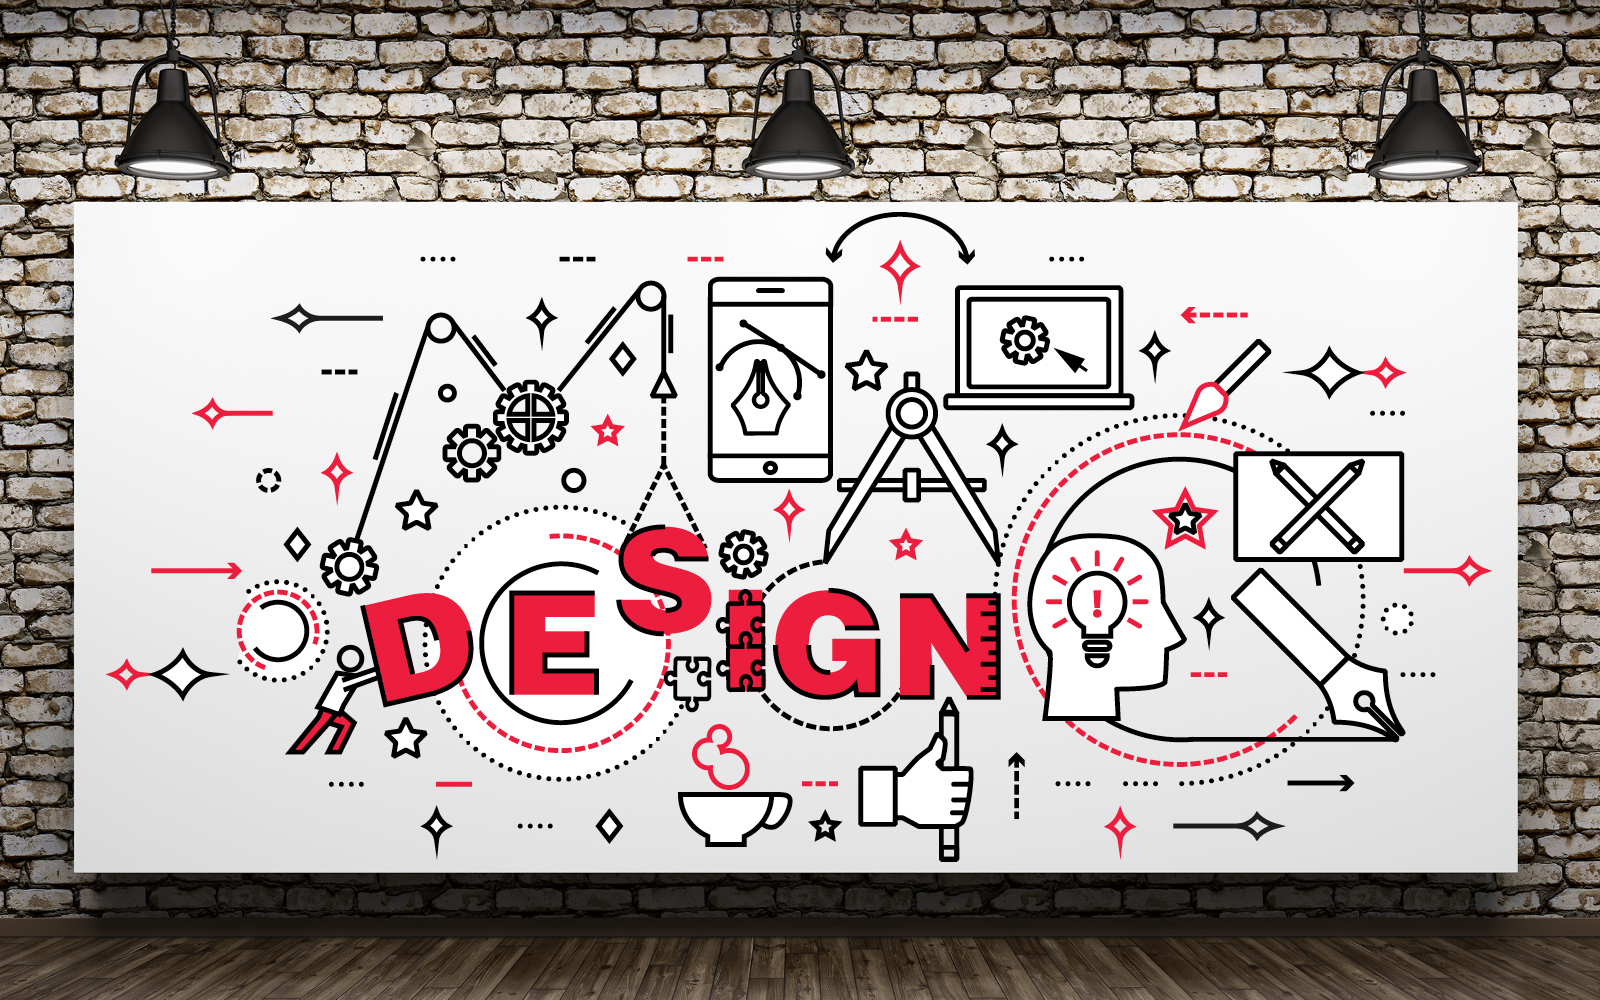 Top 10 design rules to help in your design project